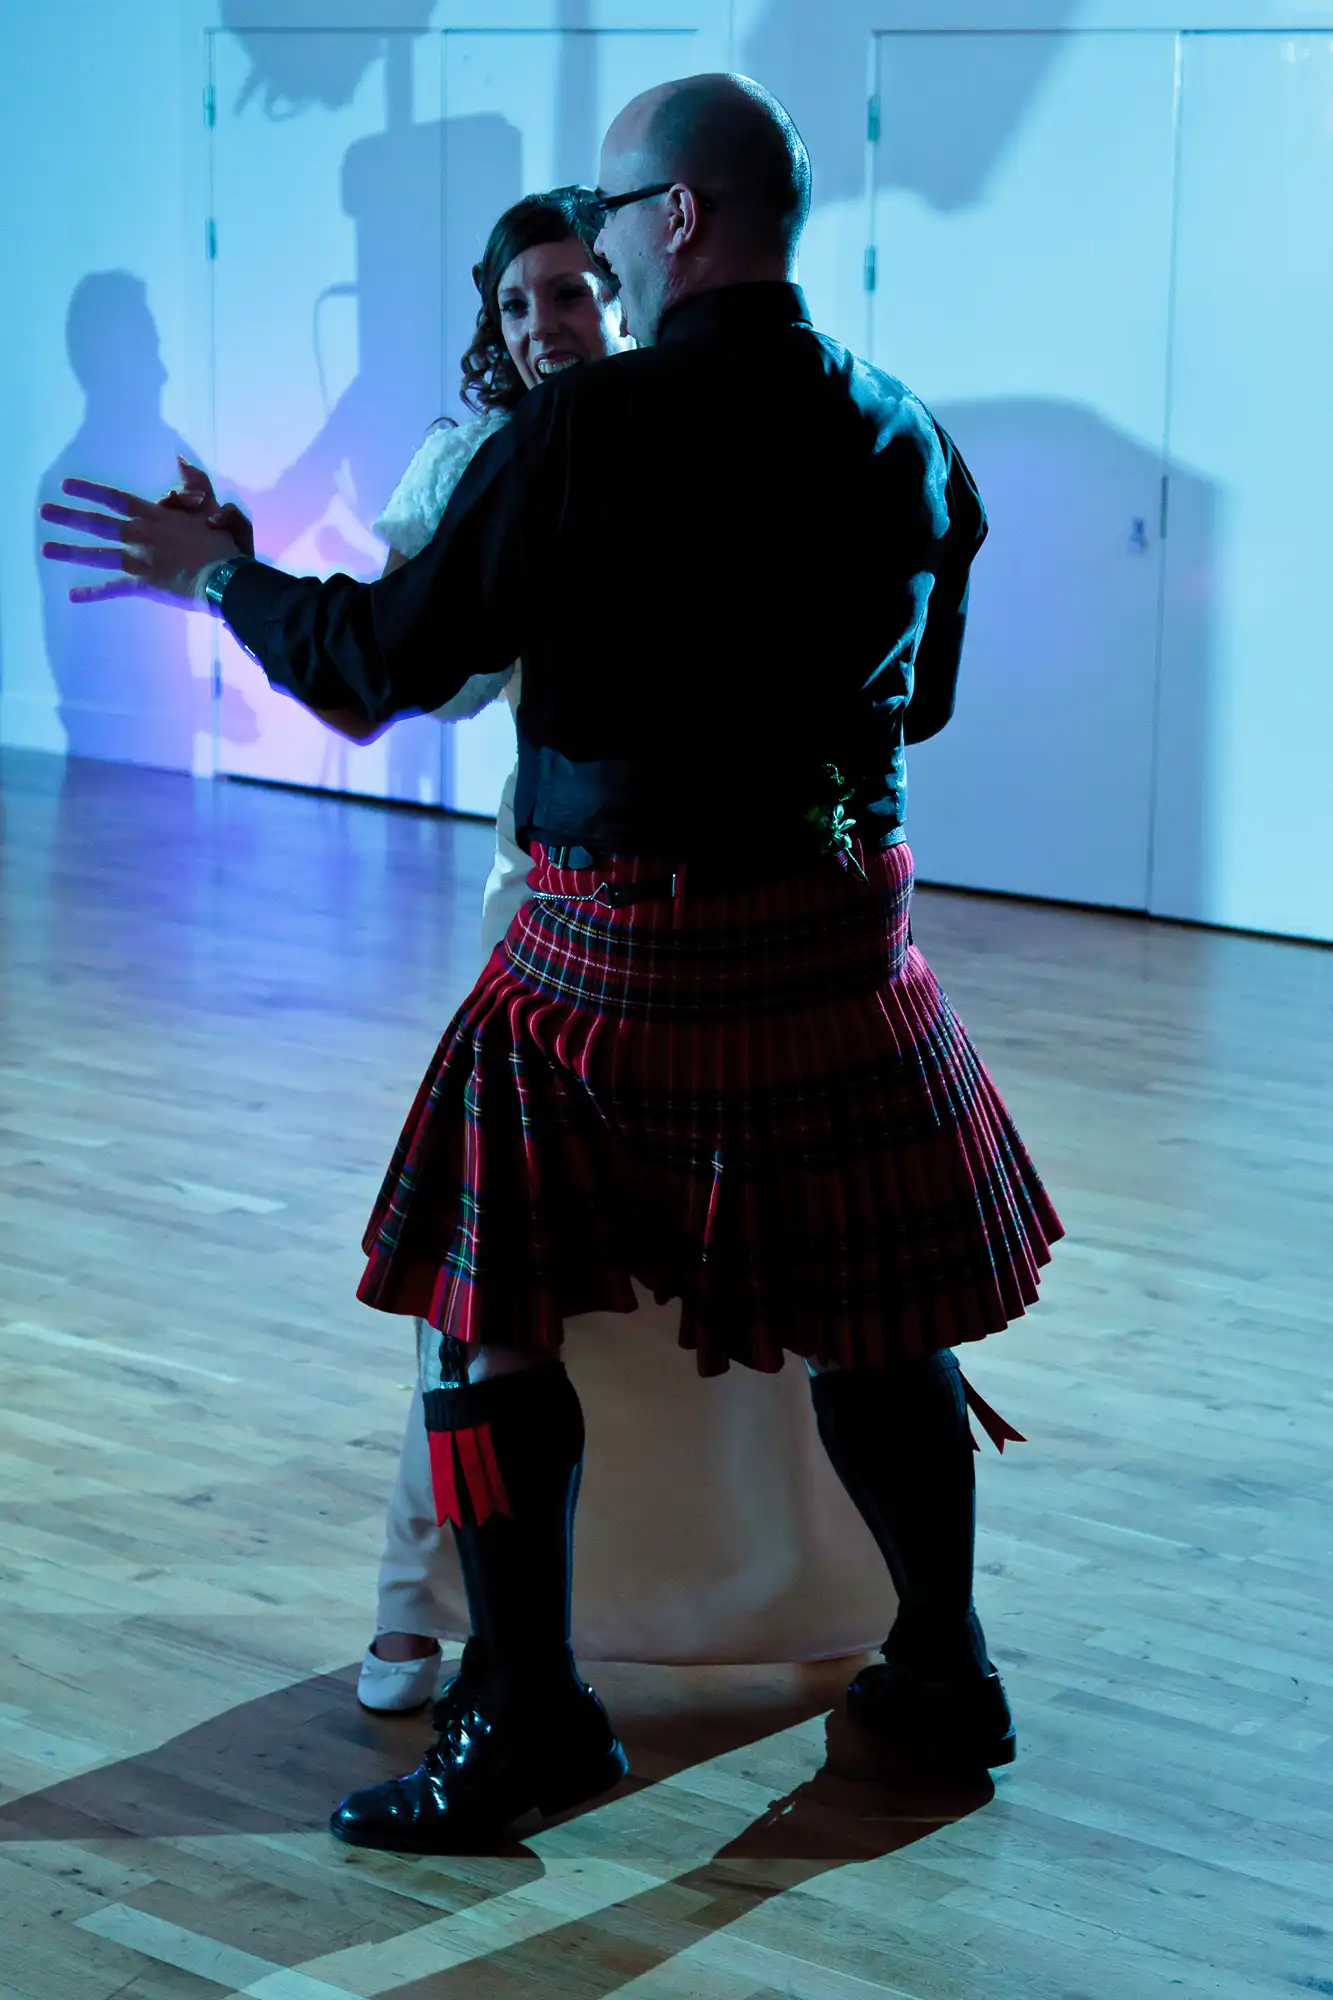 A man in a kilt and a woman dancing closely in a room with blue lighting and reflective walls.